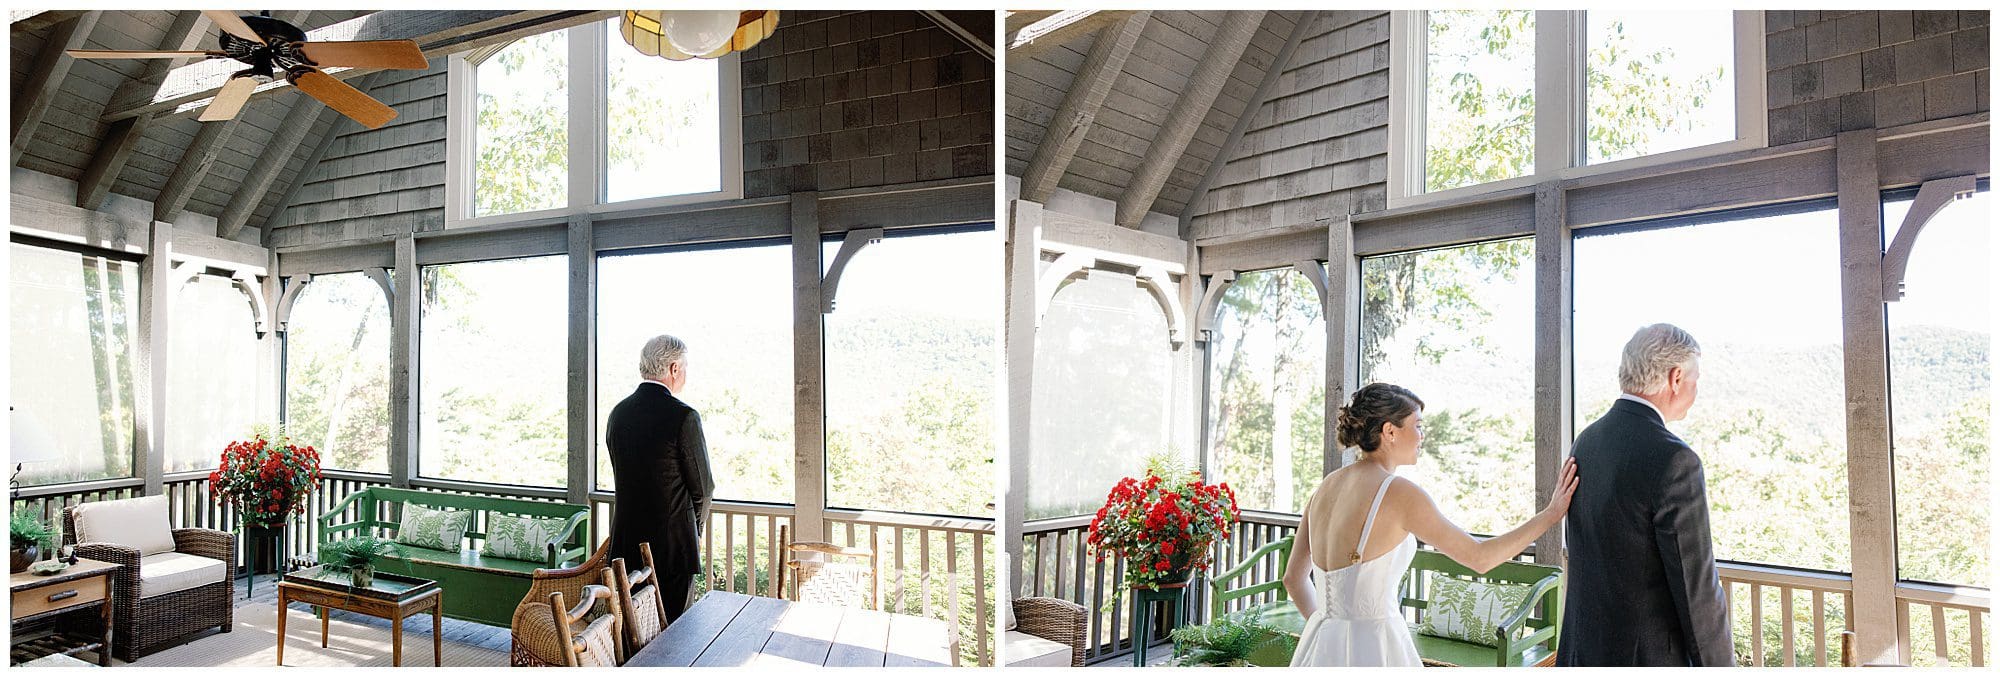 A bride and her father share a first look standing on a screened porch.